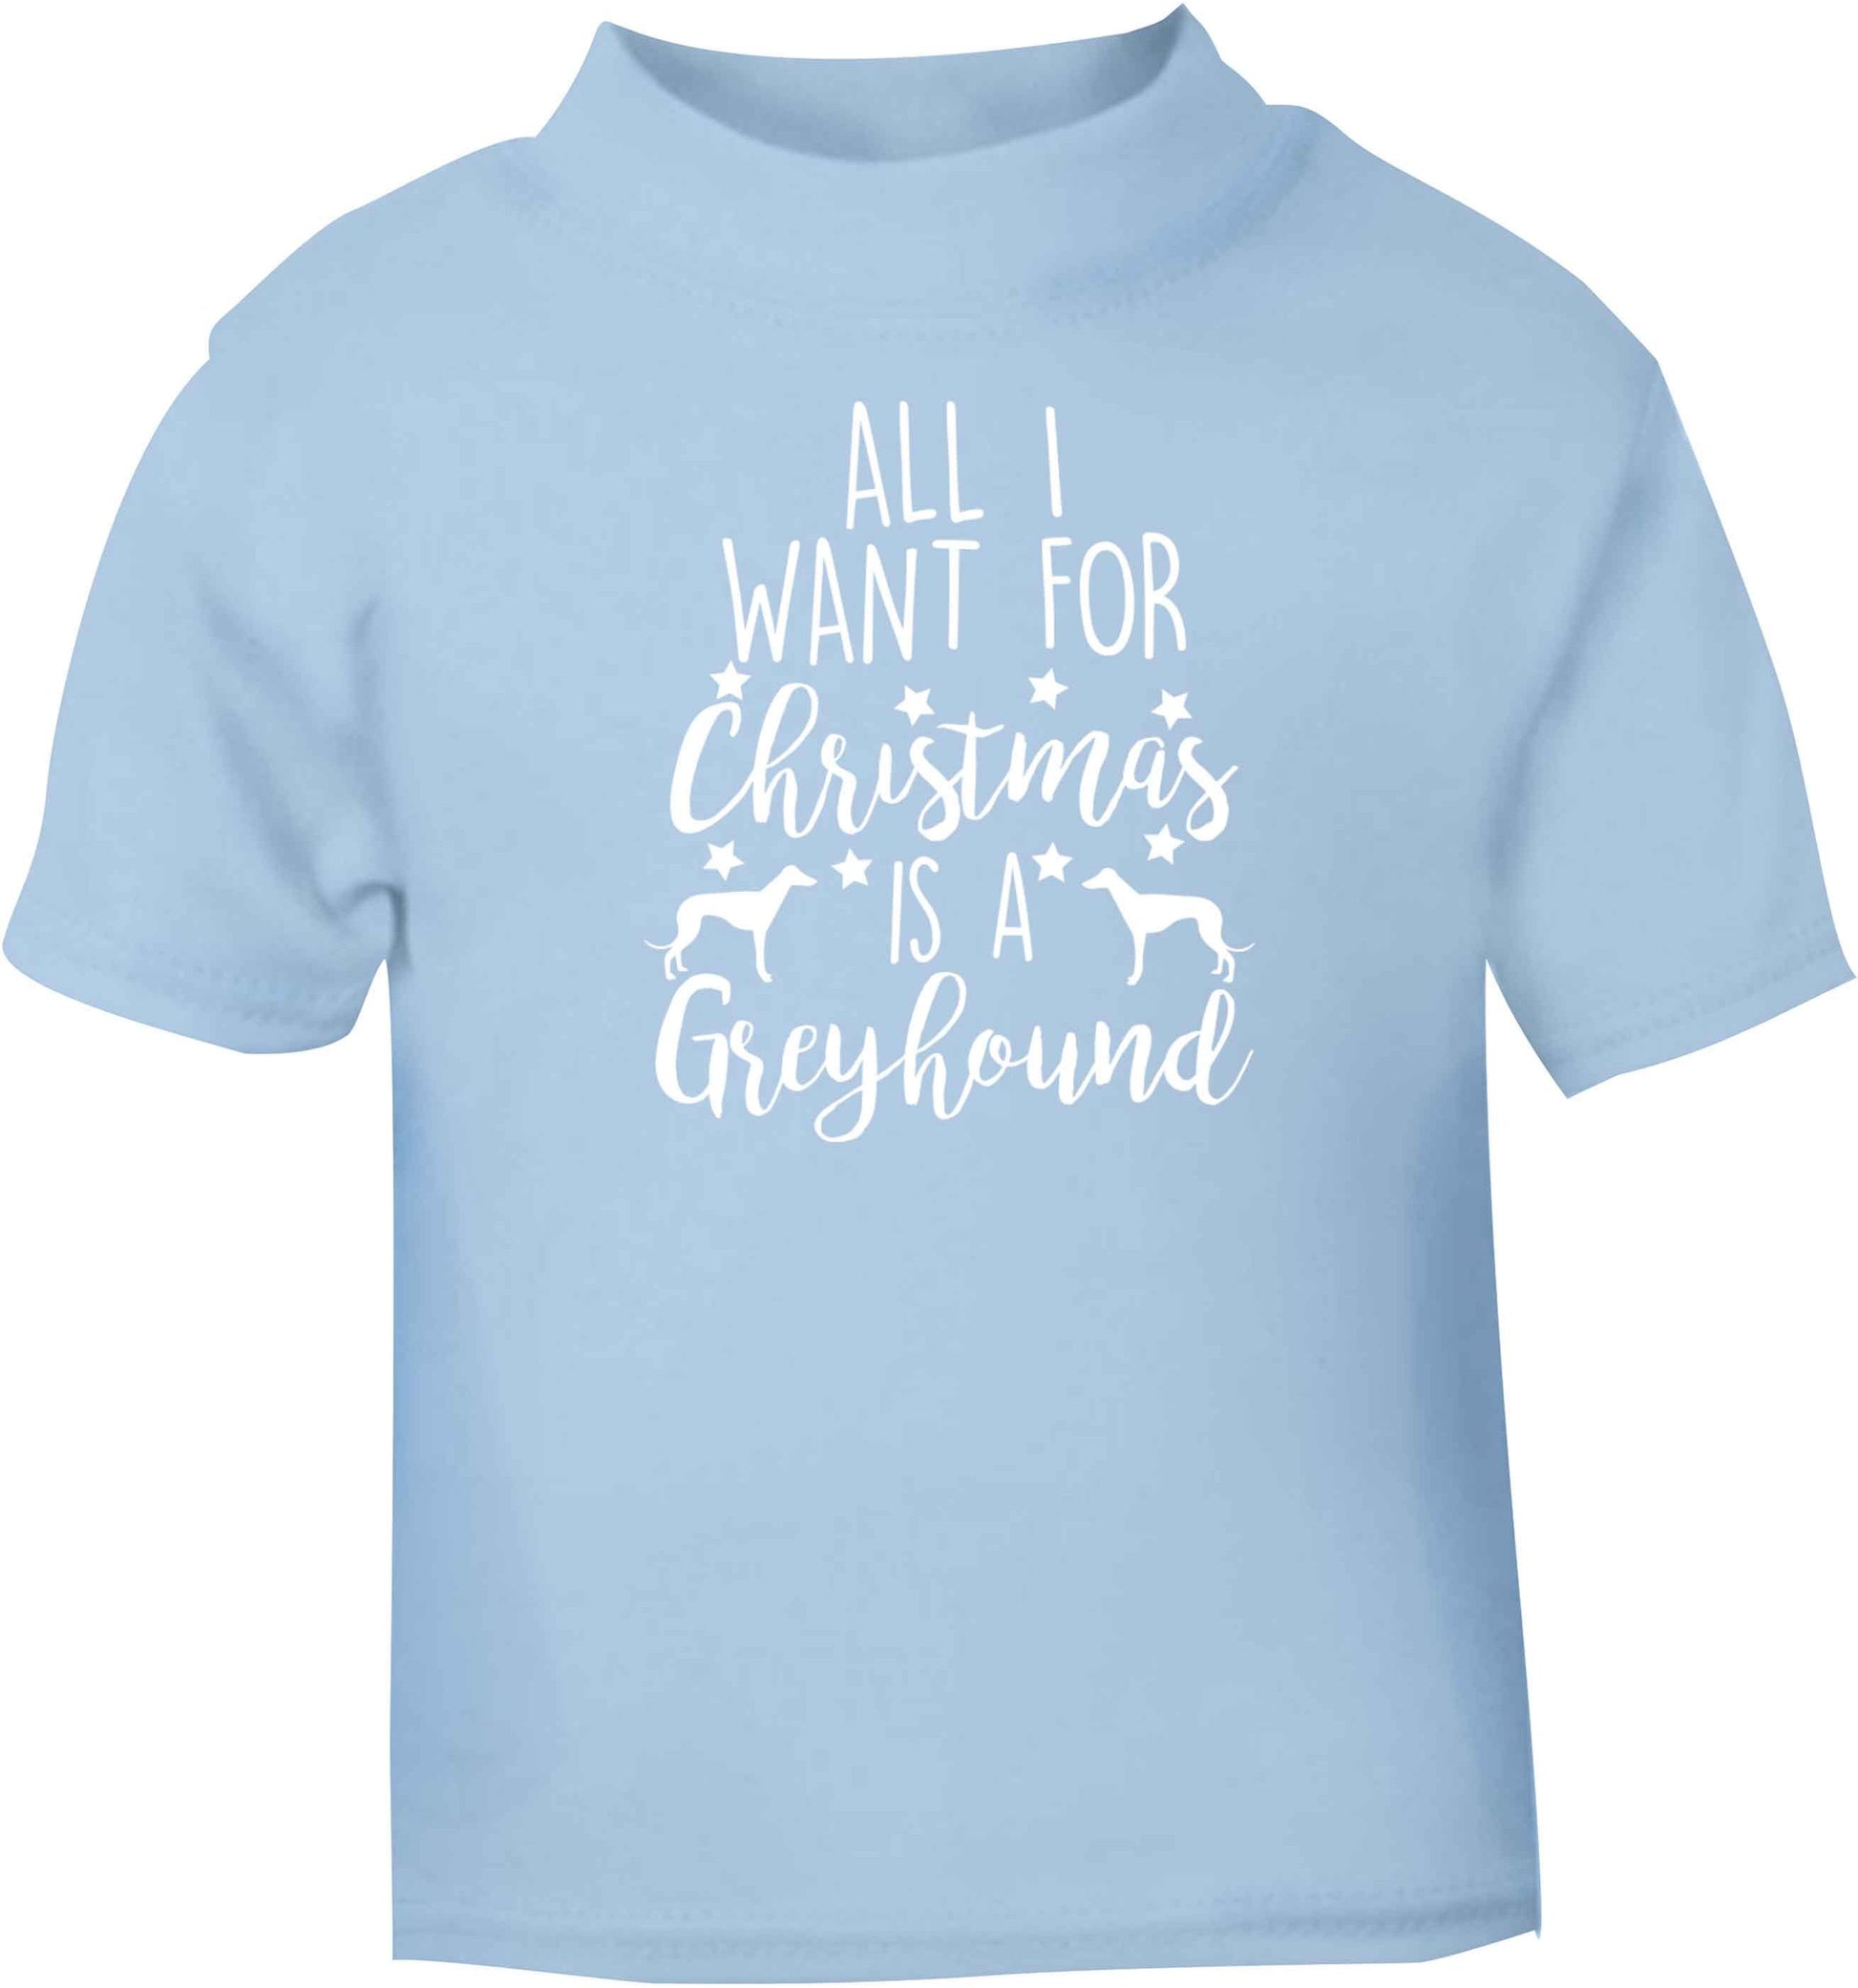 All I want for Christmas is a greyhound light blue baby toddler Tshirt 2 Years